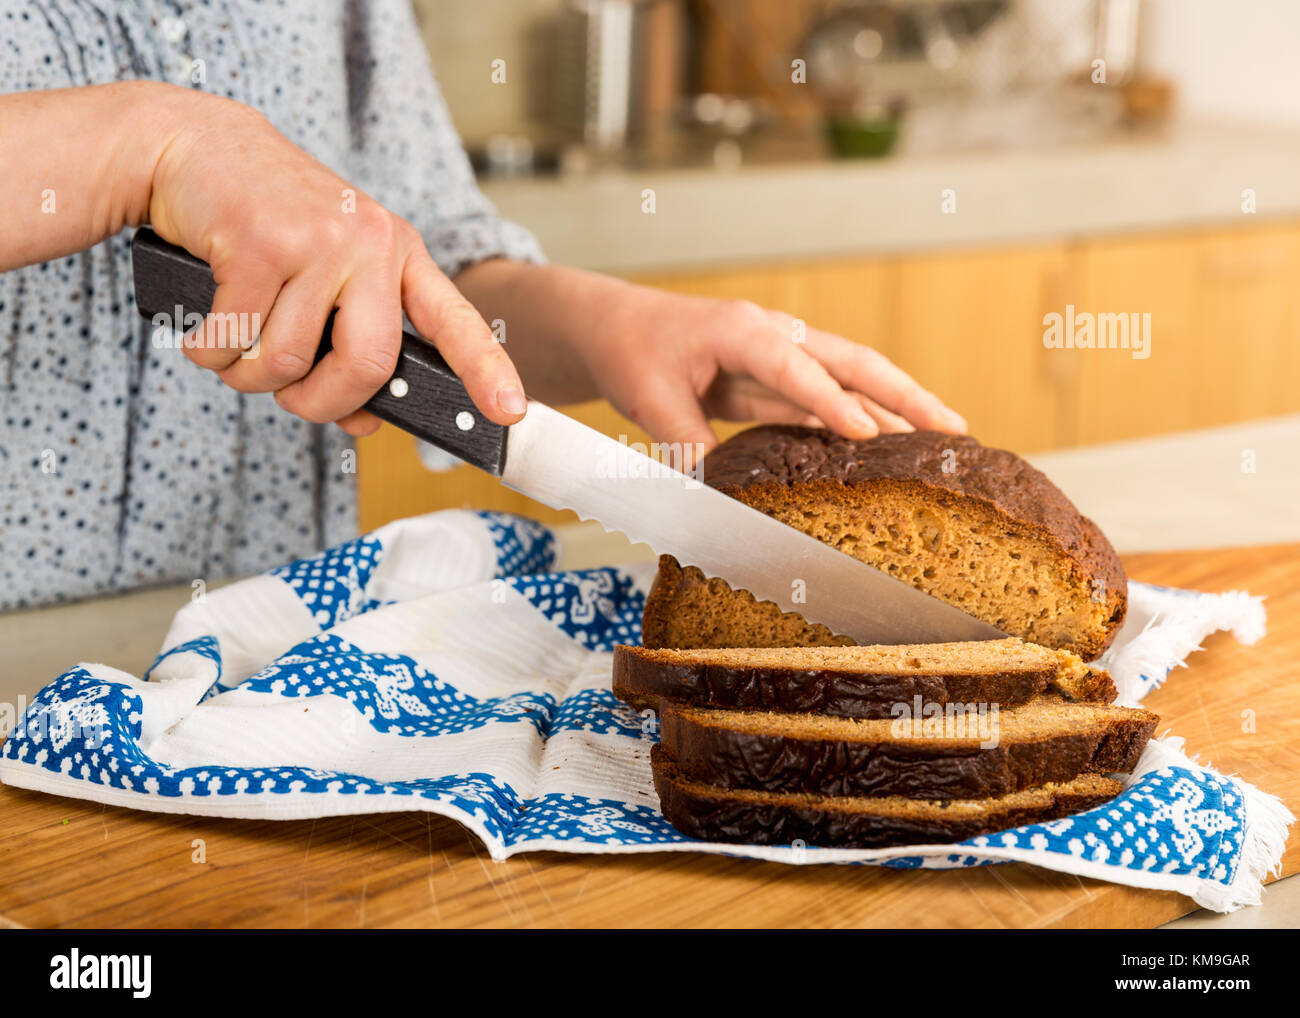 Woman cutting slices of gluten-free bread Stock Photo